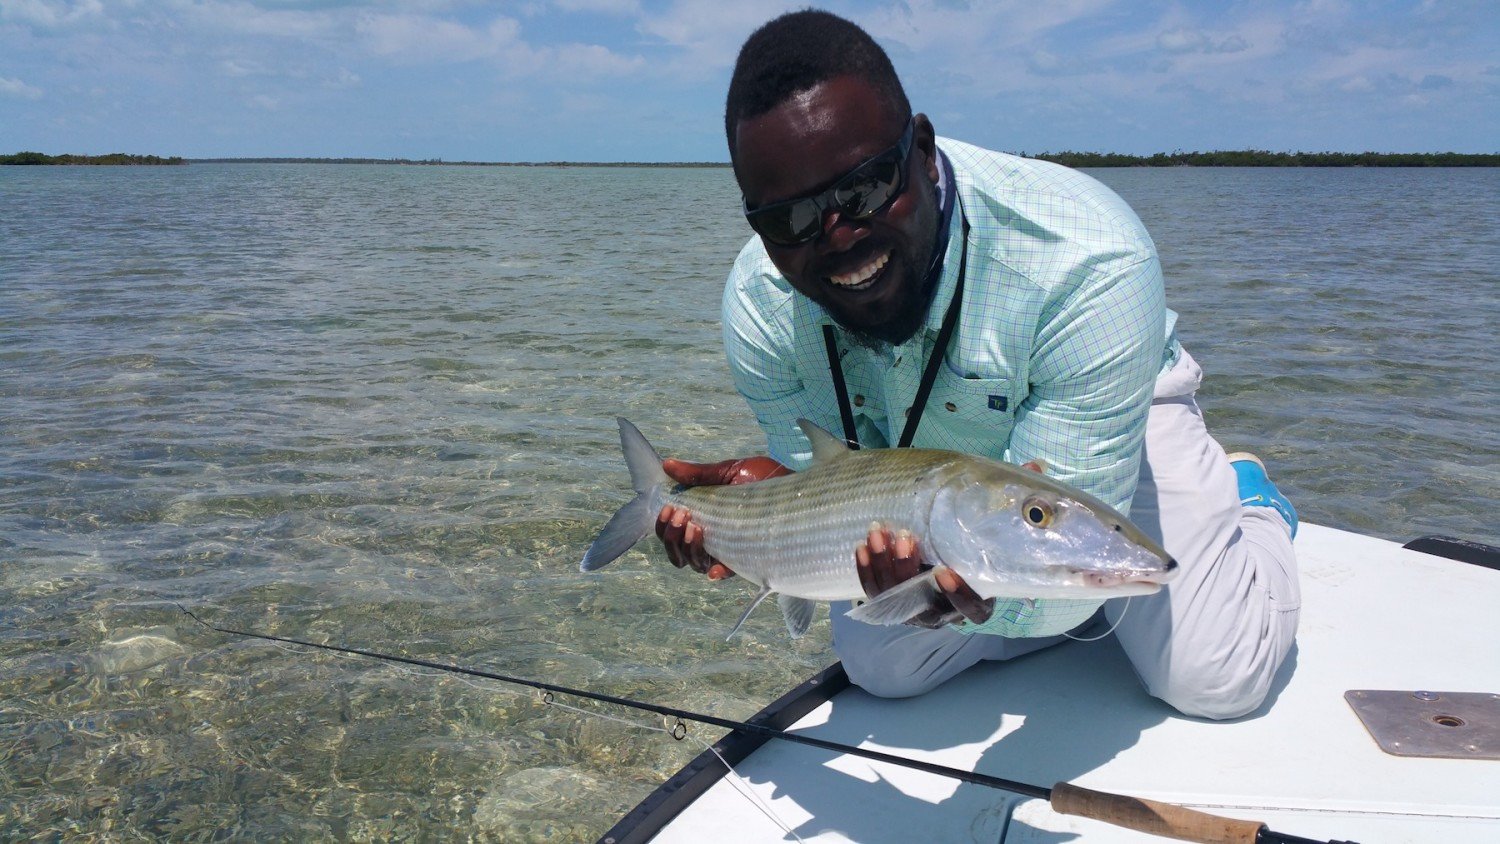 T&T Pro guide Meko Glinton with a nice Bahamian bone and the Solar 908